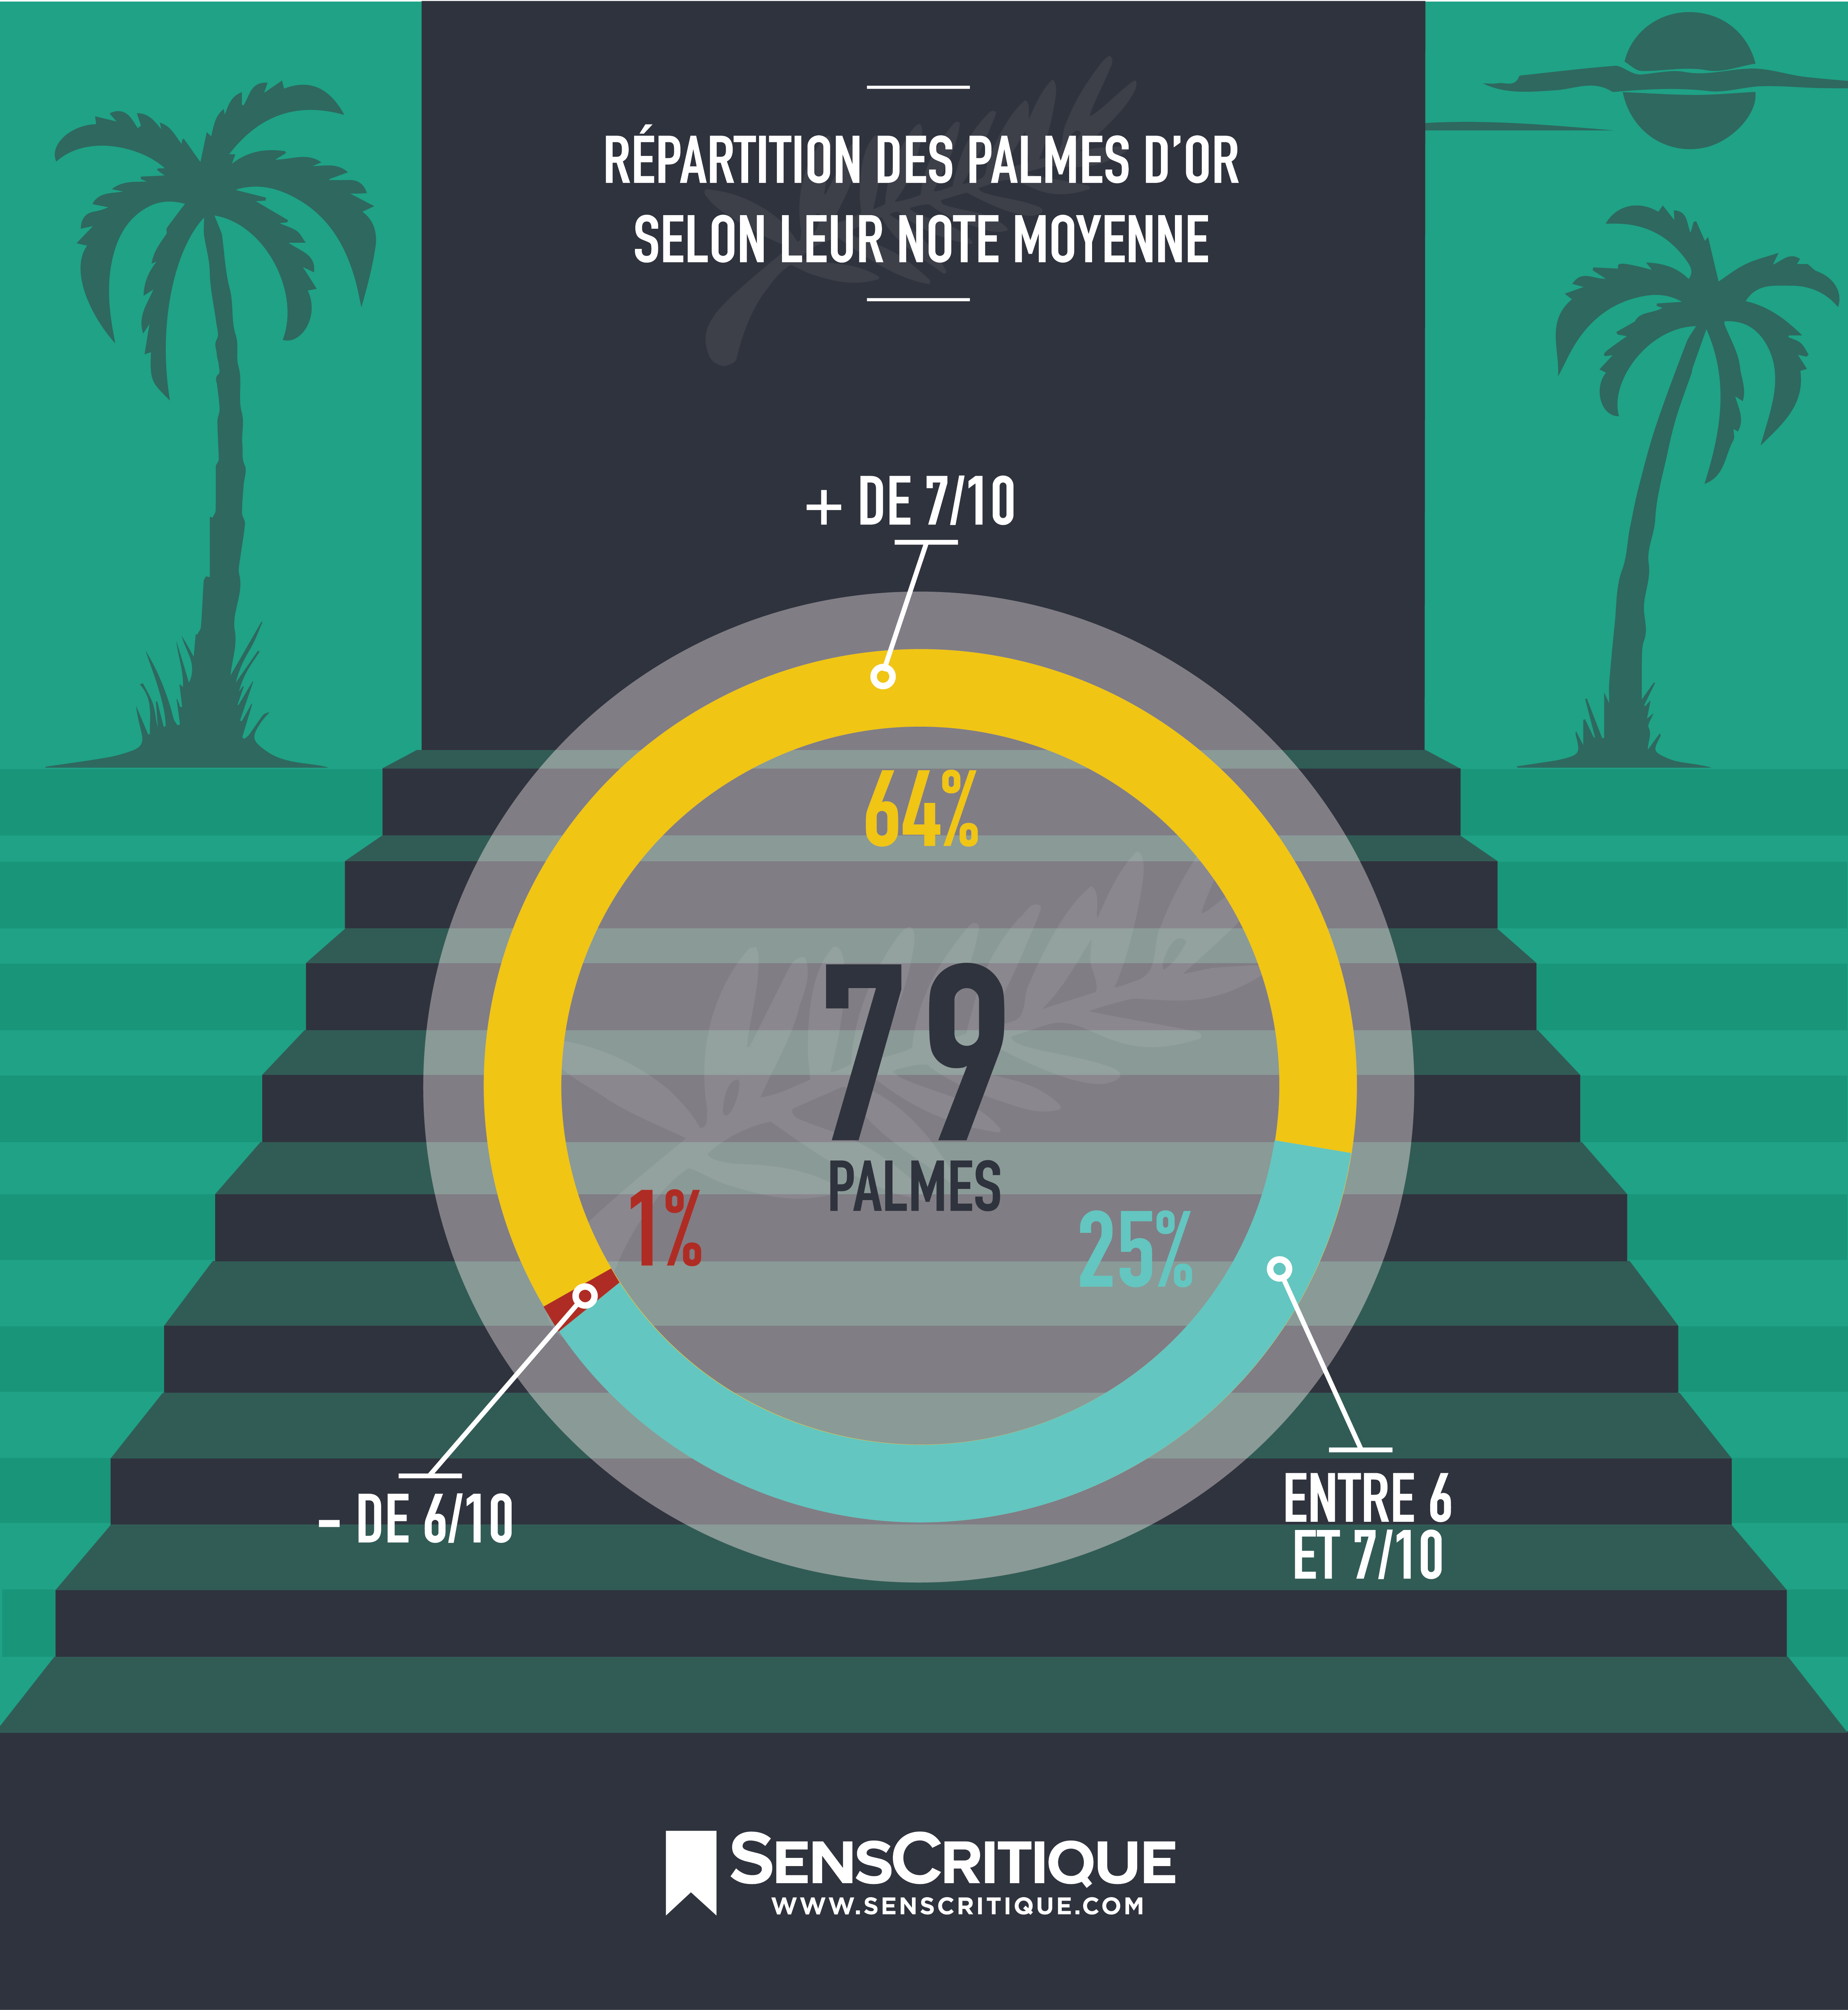 2016-05-25-1464205426-417824-infographie1repartitiondespalmesselontleurnotemoyenne.png